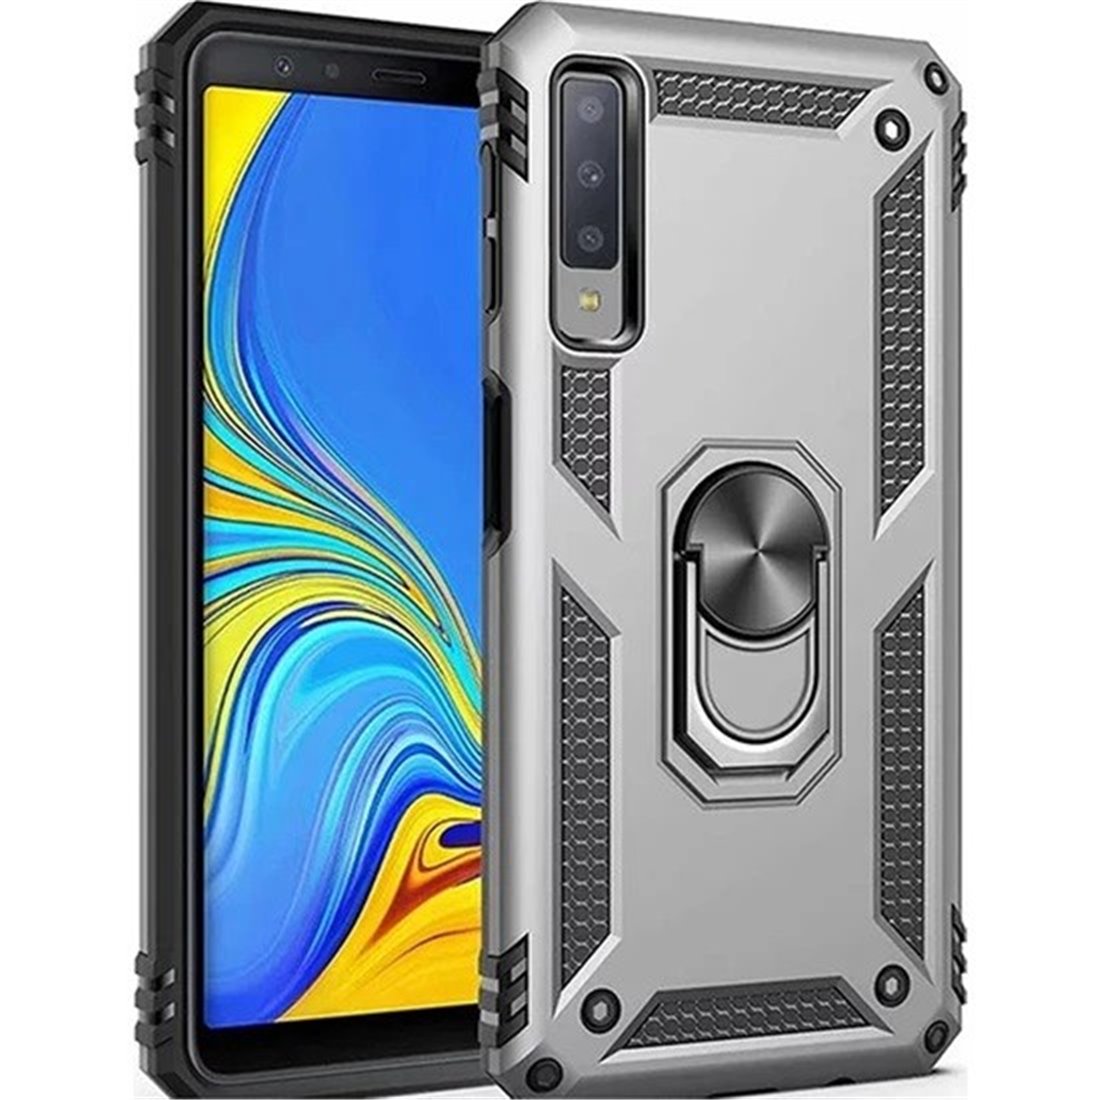 Samsung Galaxy A7 2018 Plastic Silver Back Cover - Solid ring